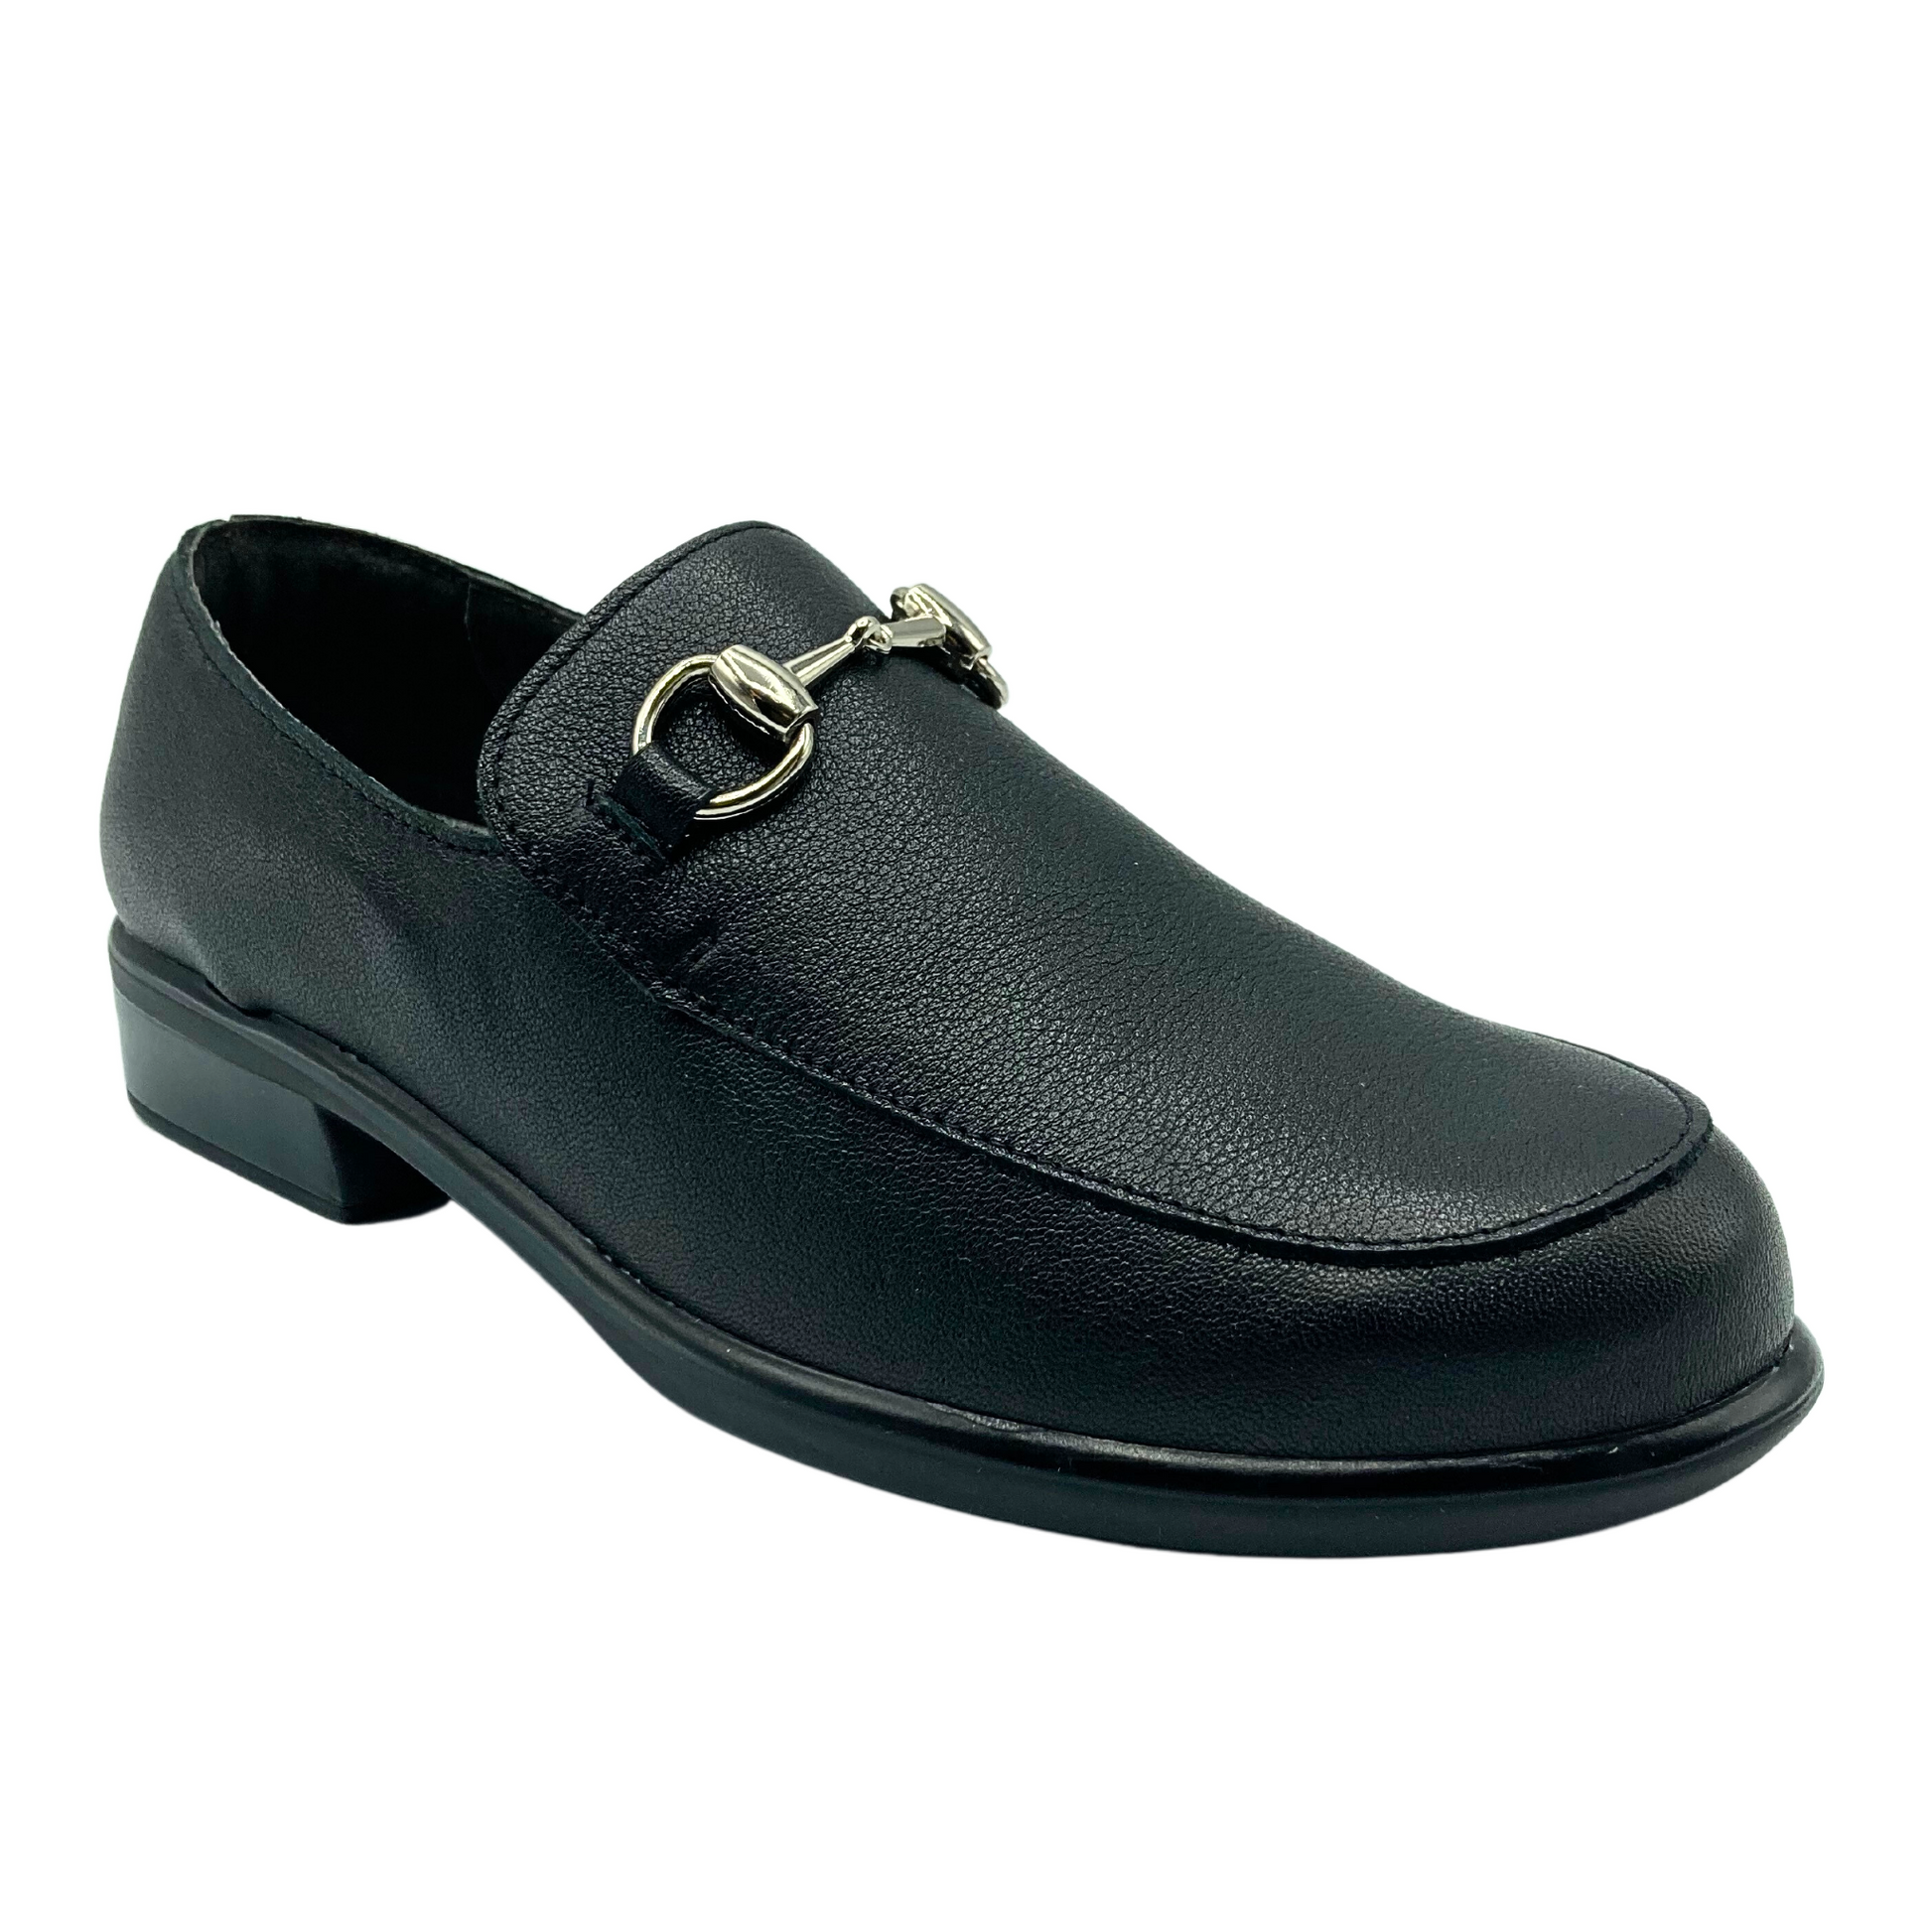 Angled front view of basic black loafer with a gold metallic detail 